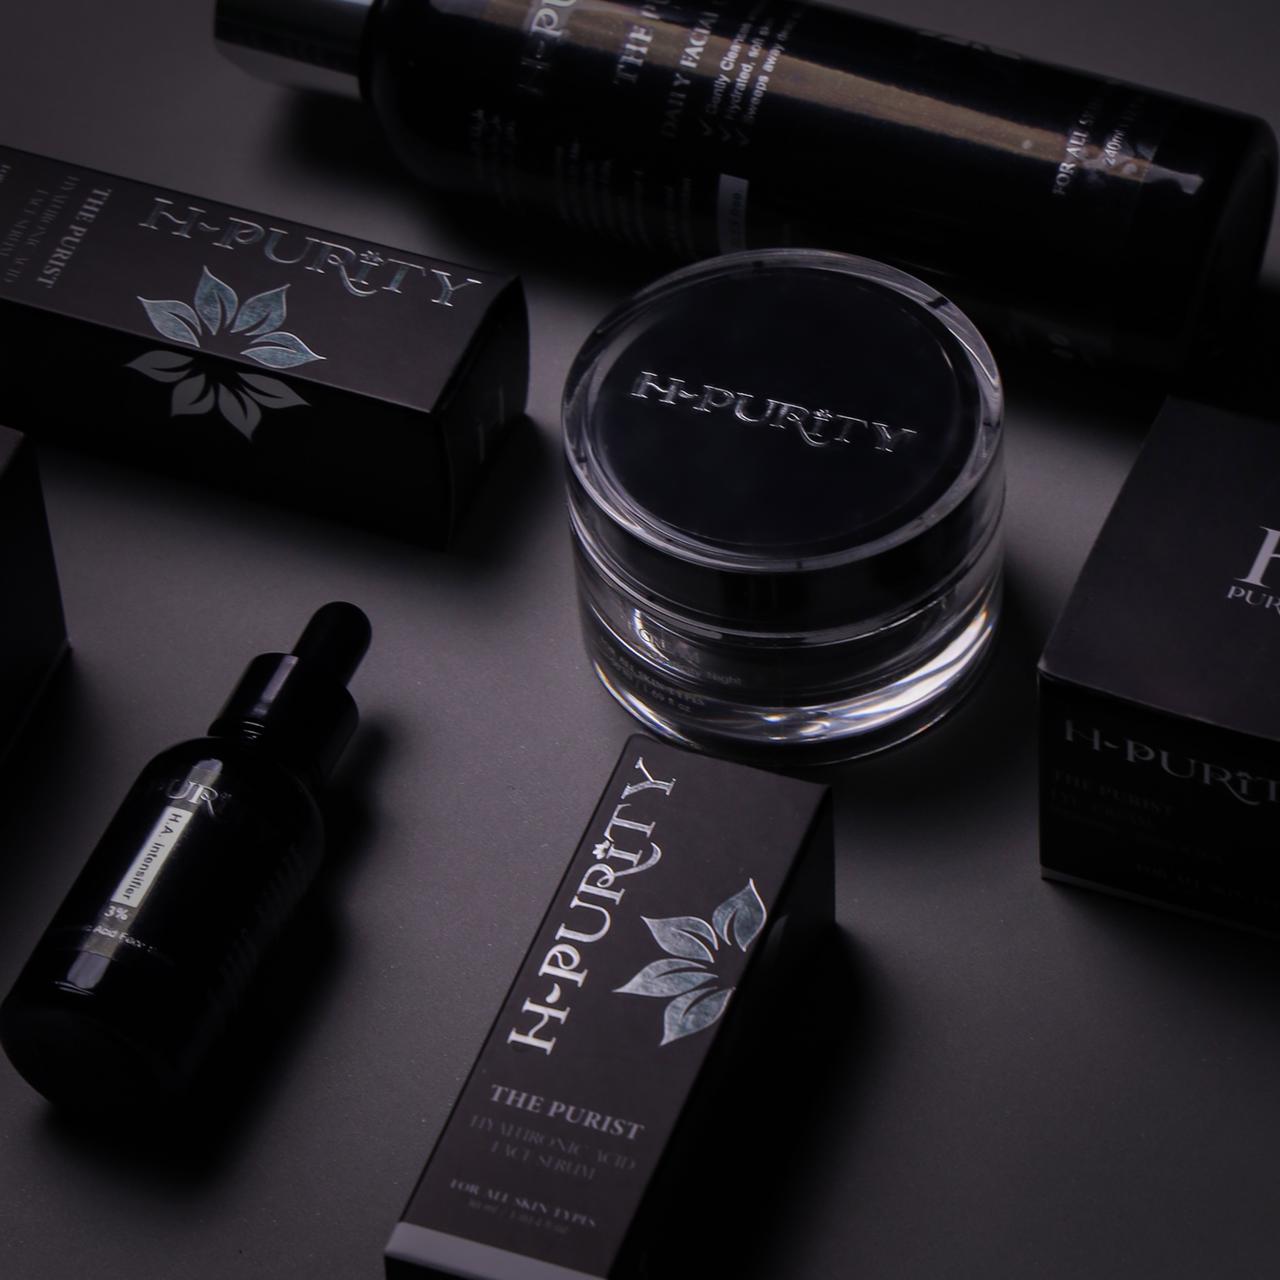 H Purity, one of the best and most renowned Lebanese skincare brands